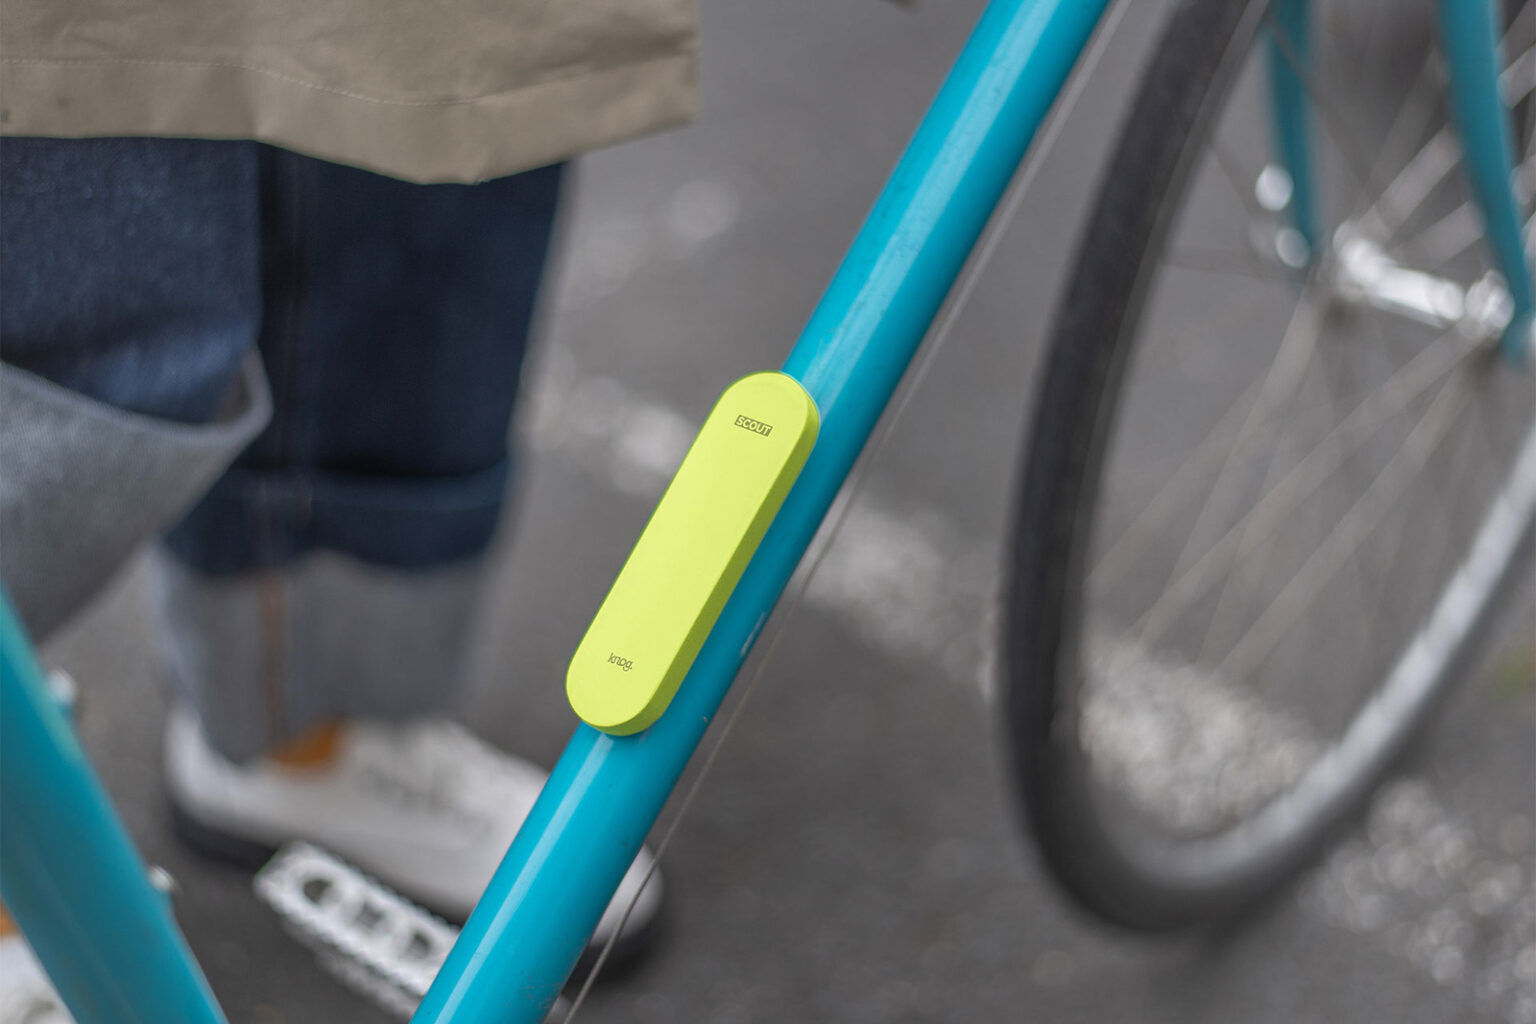 Knog Scout bike alarm and finder, on bike with cover